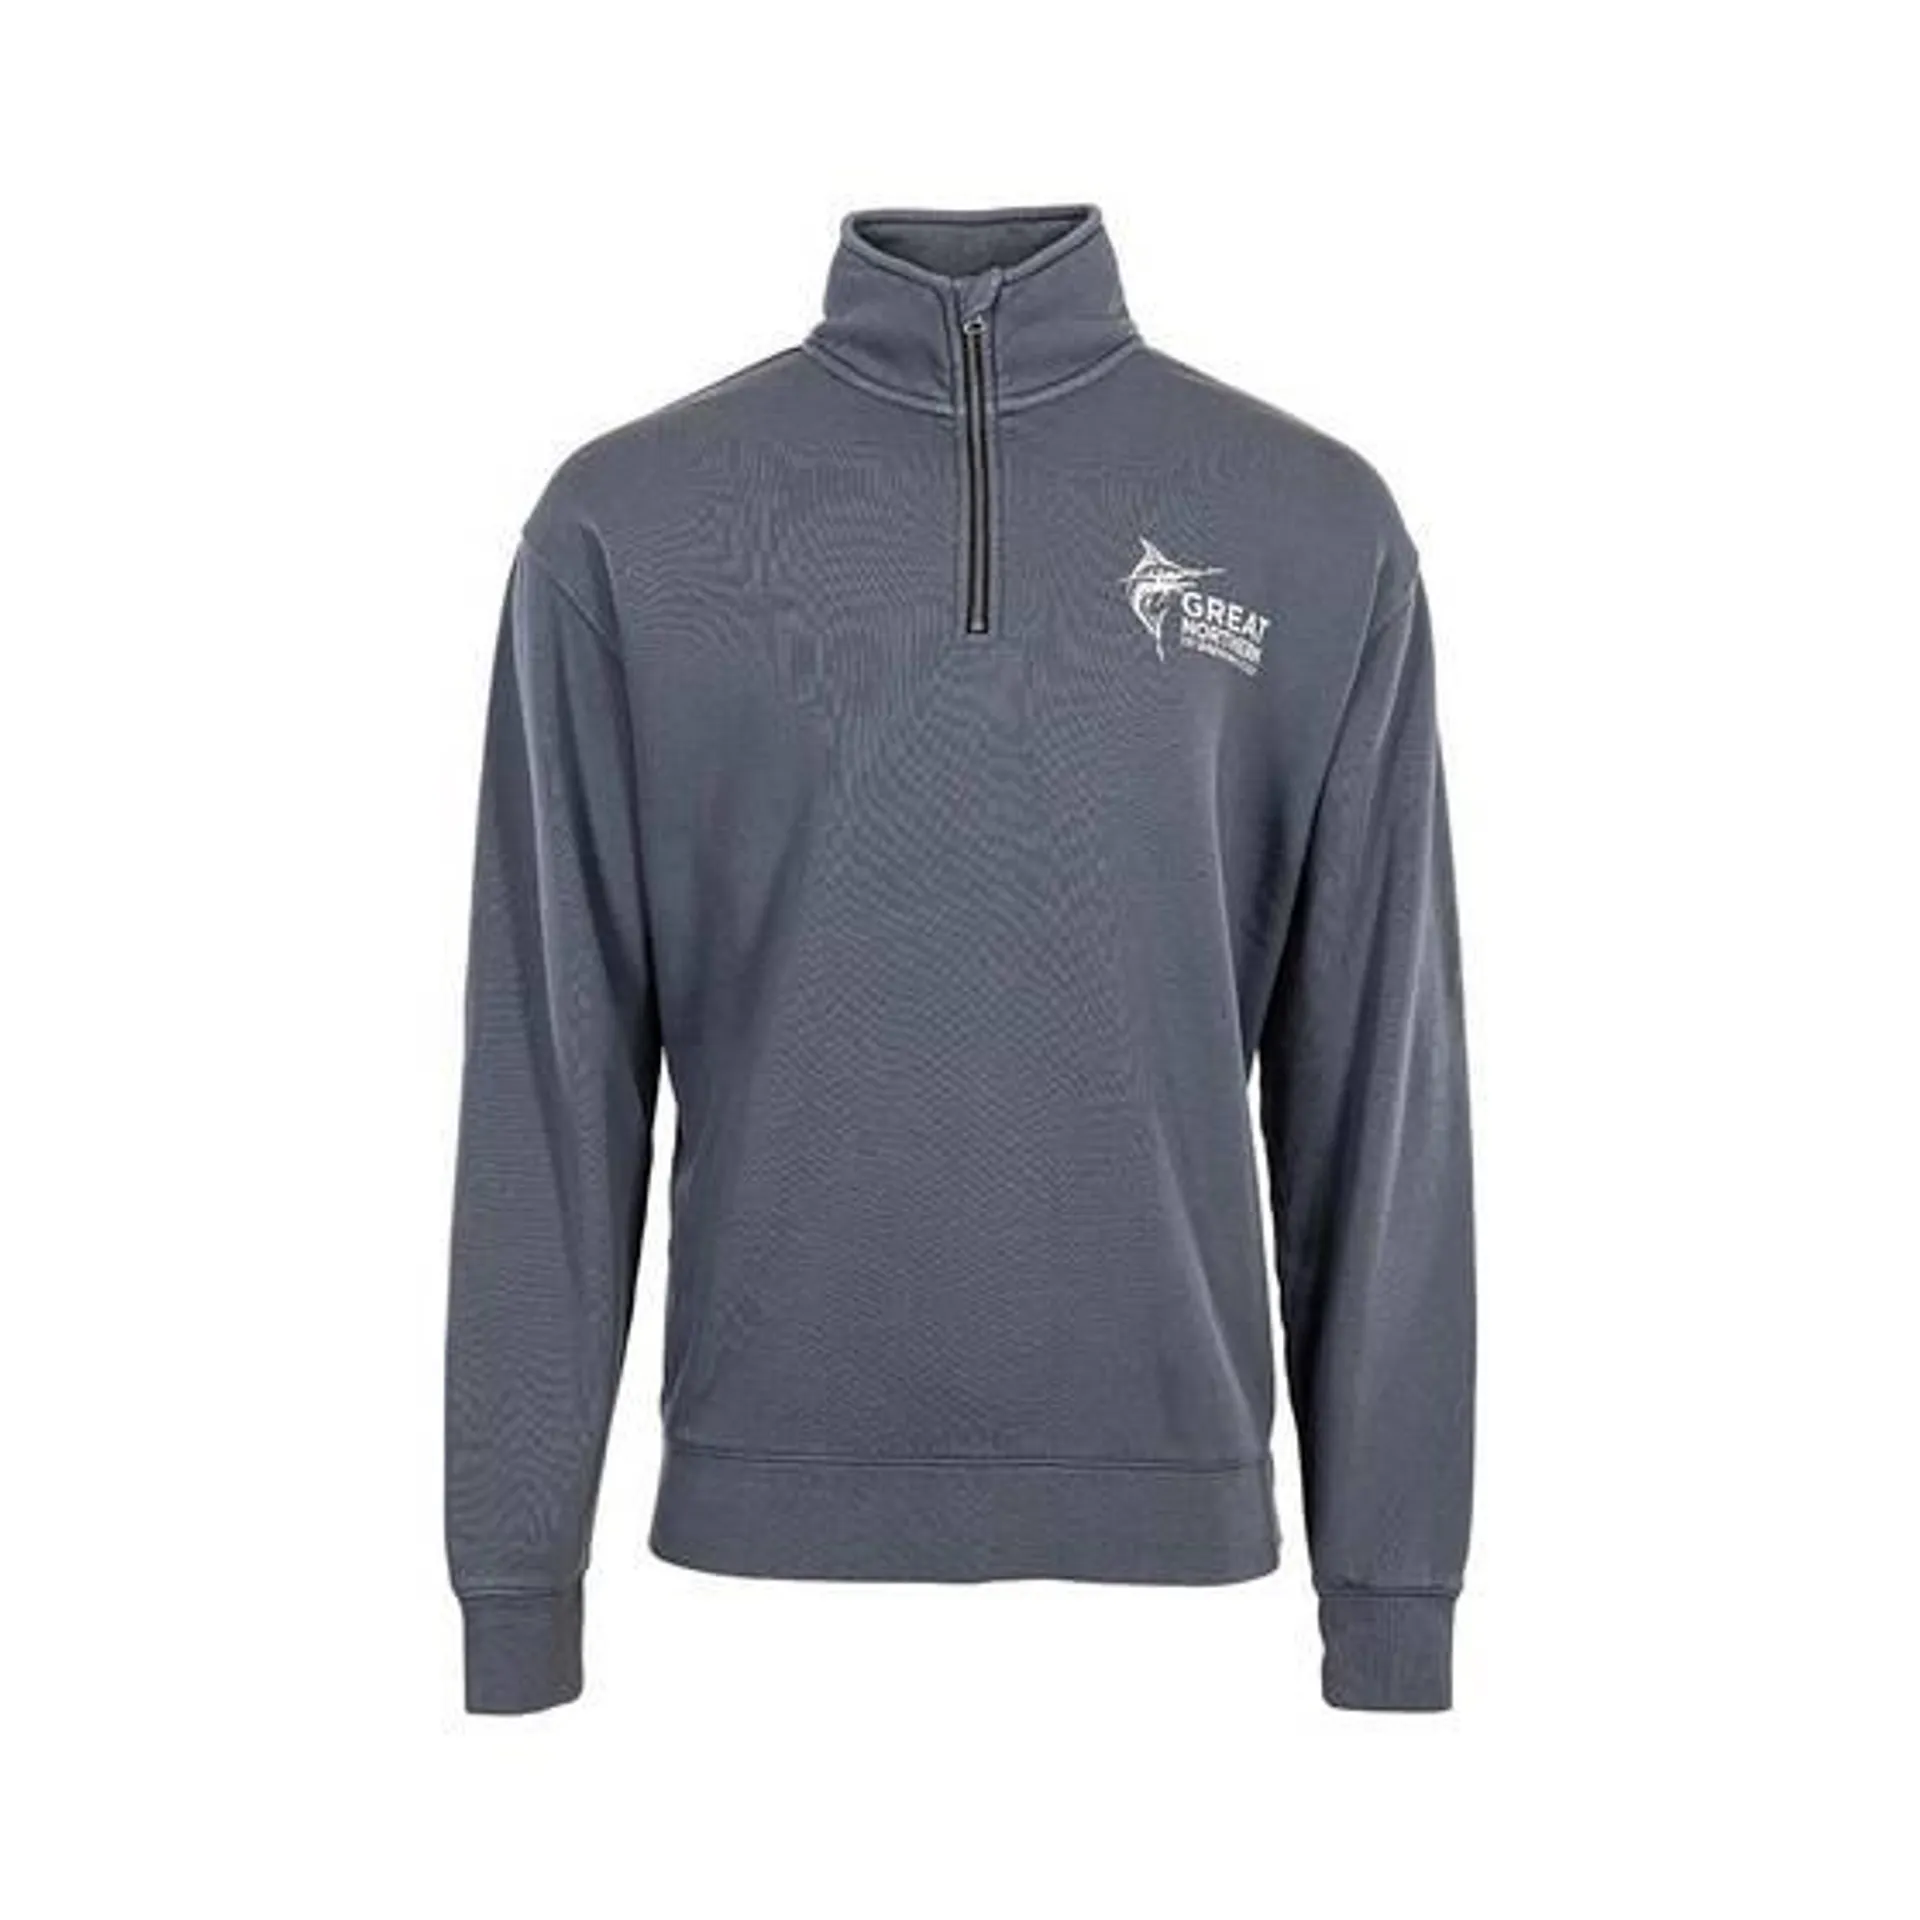 The Great Northern Brewing Co. Men's Pullover